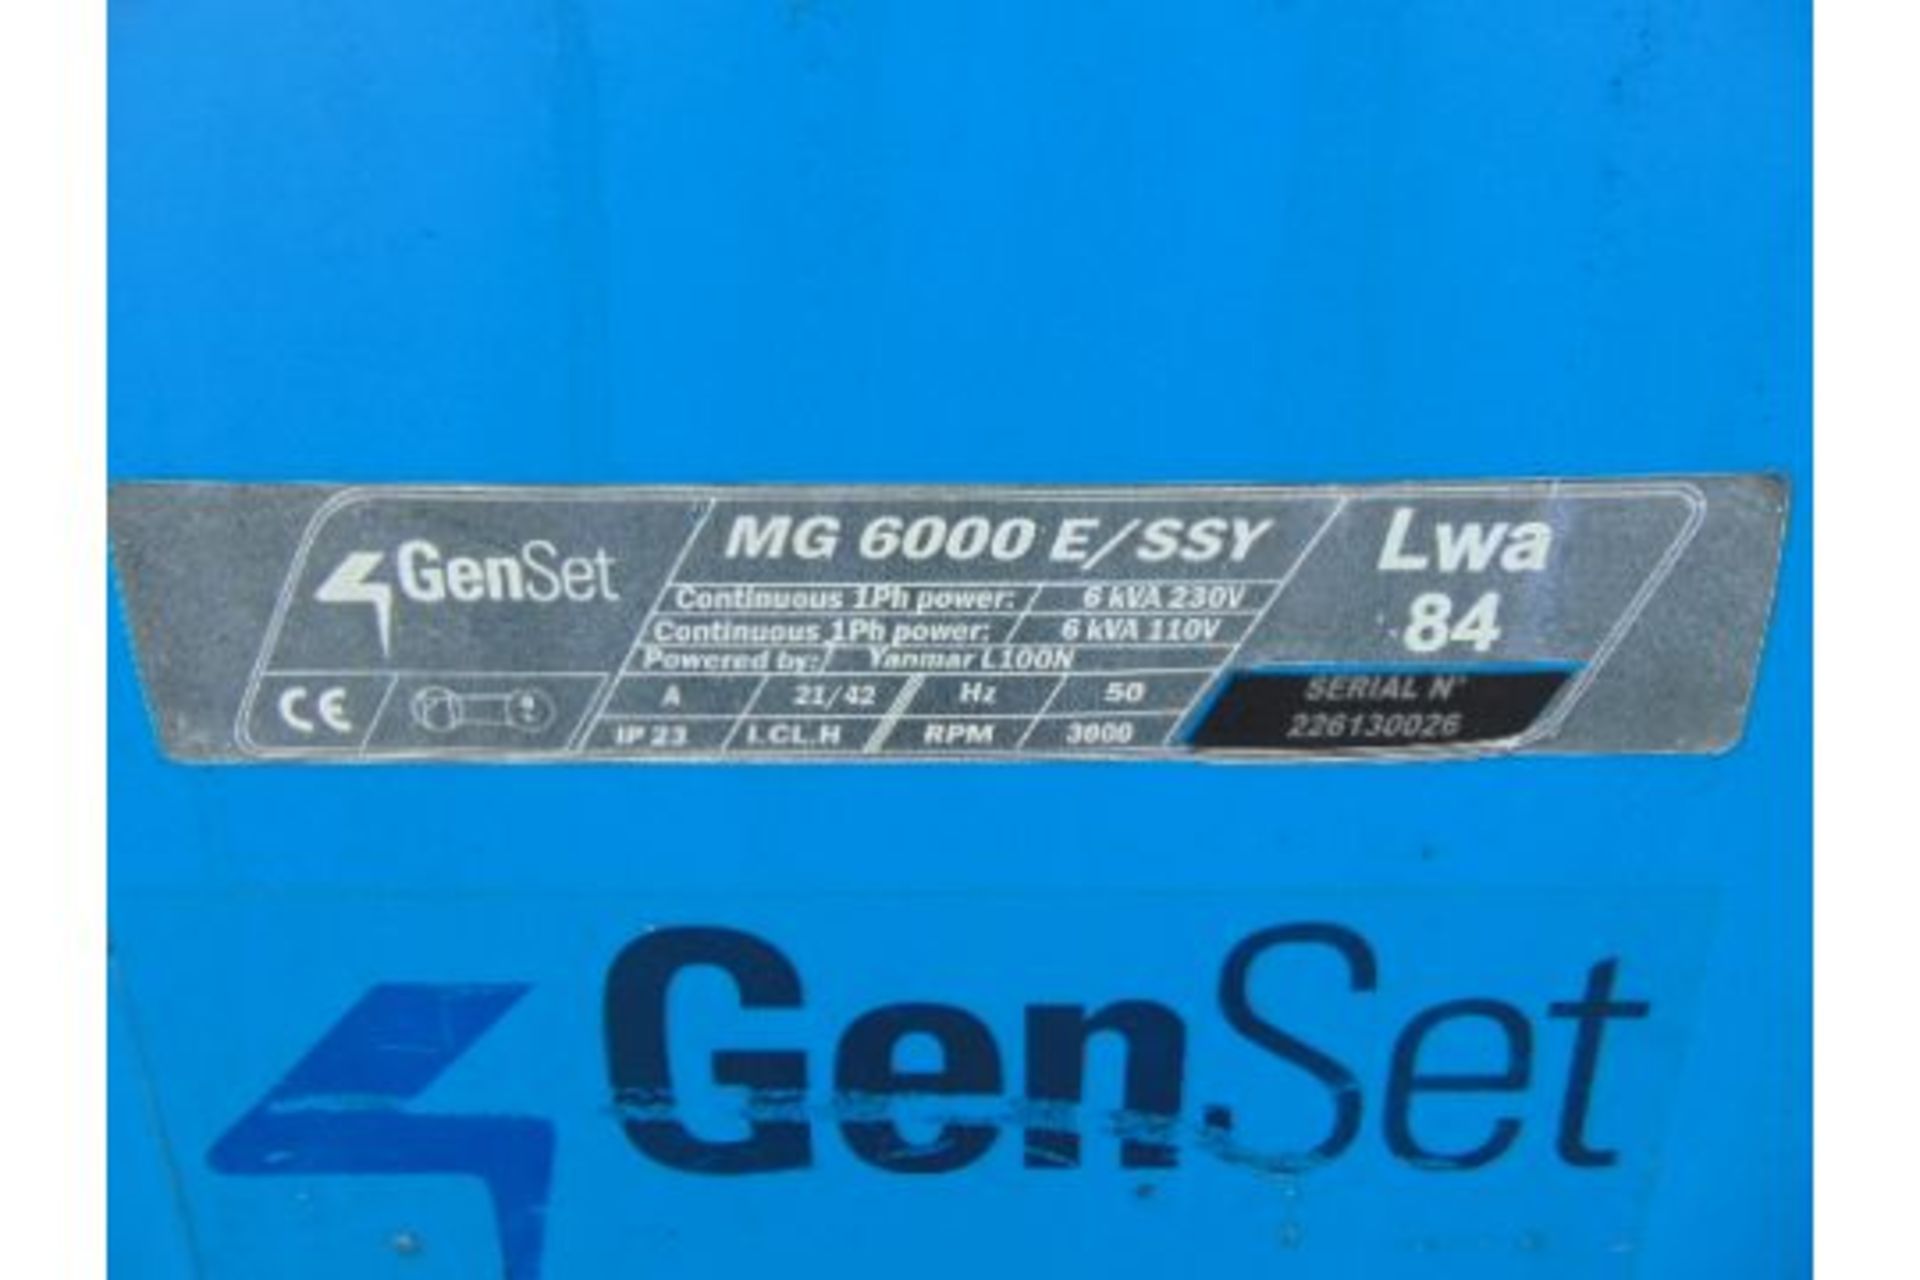 Genset MG 6000 E-SSY 6KVA Diesel Generator ONLY 3,877 HOURS - Image 8 of 11